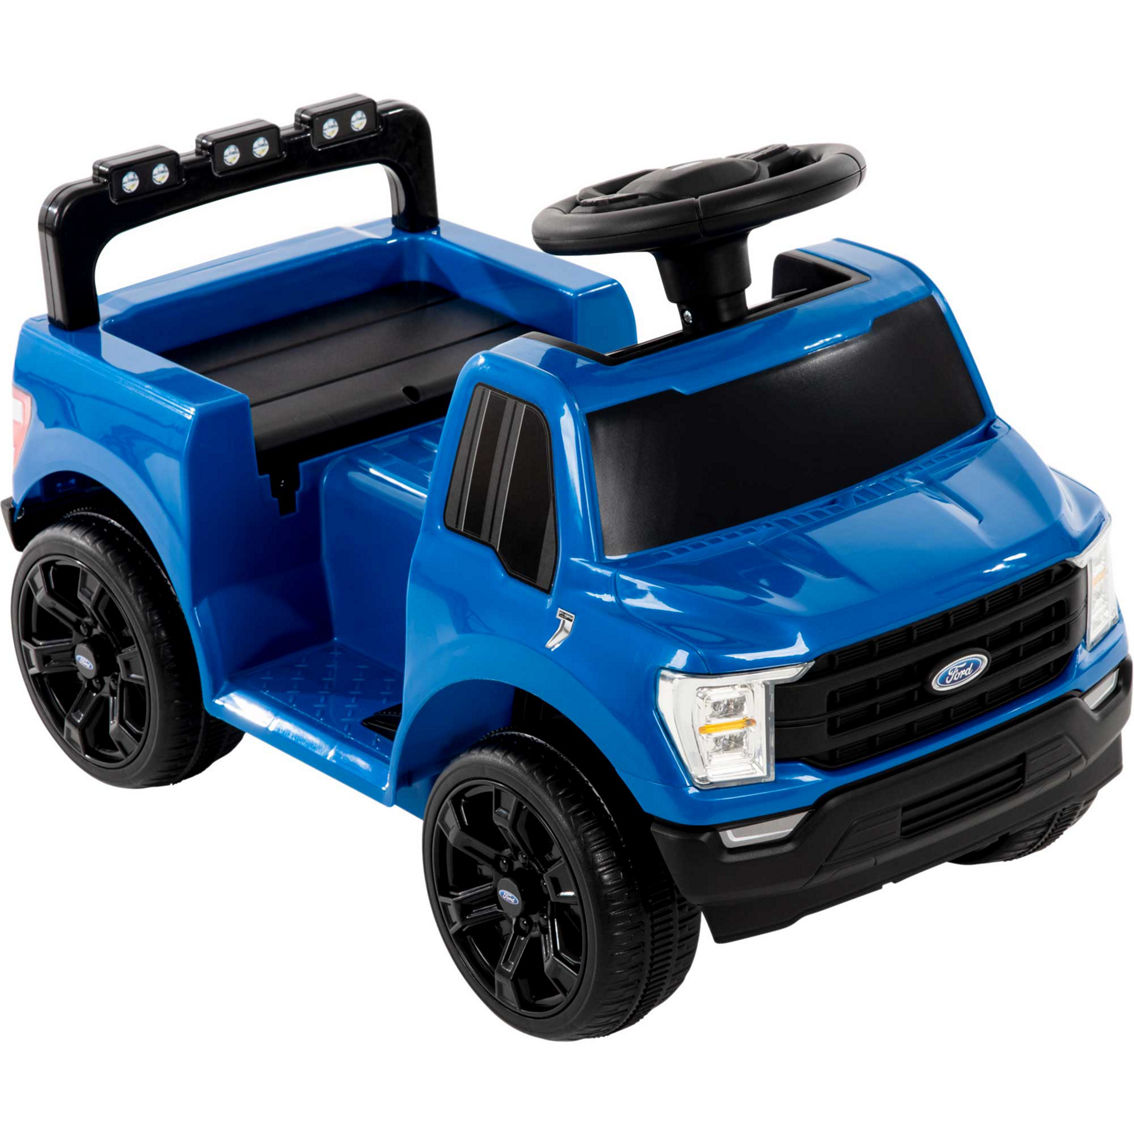 Huffy 6V Ford F150 Truck Battery Ride On Toy - Image 1 of 9